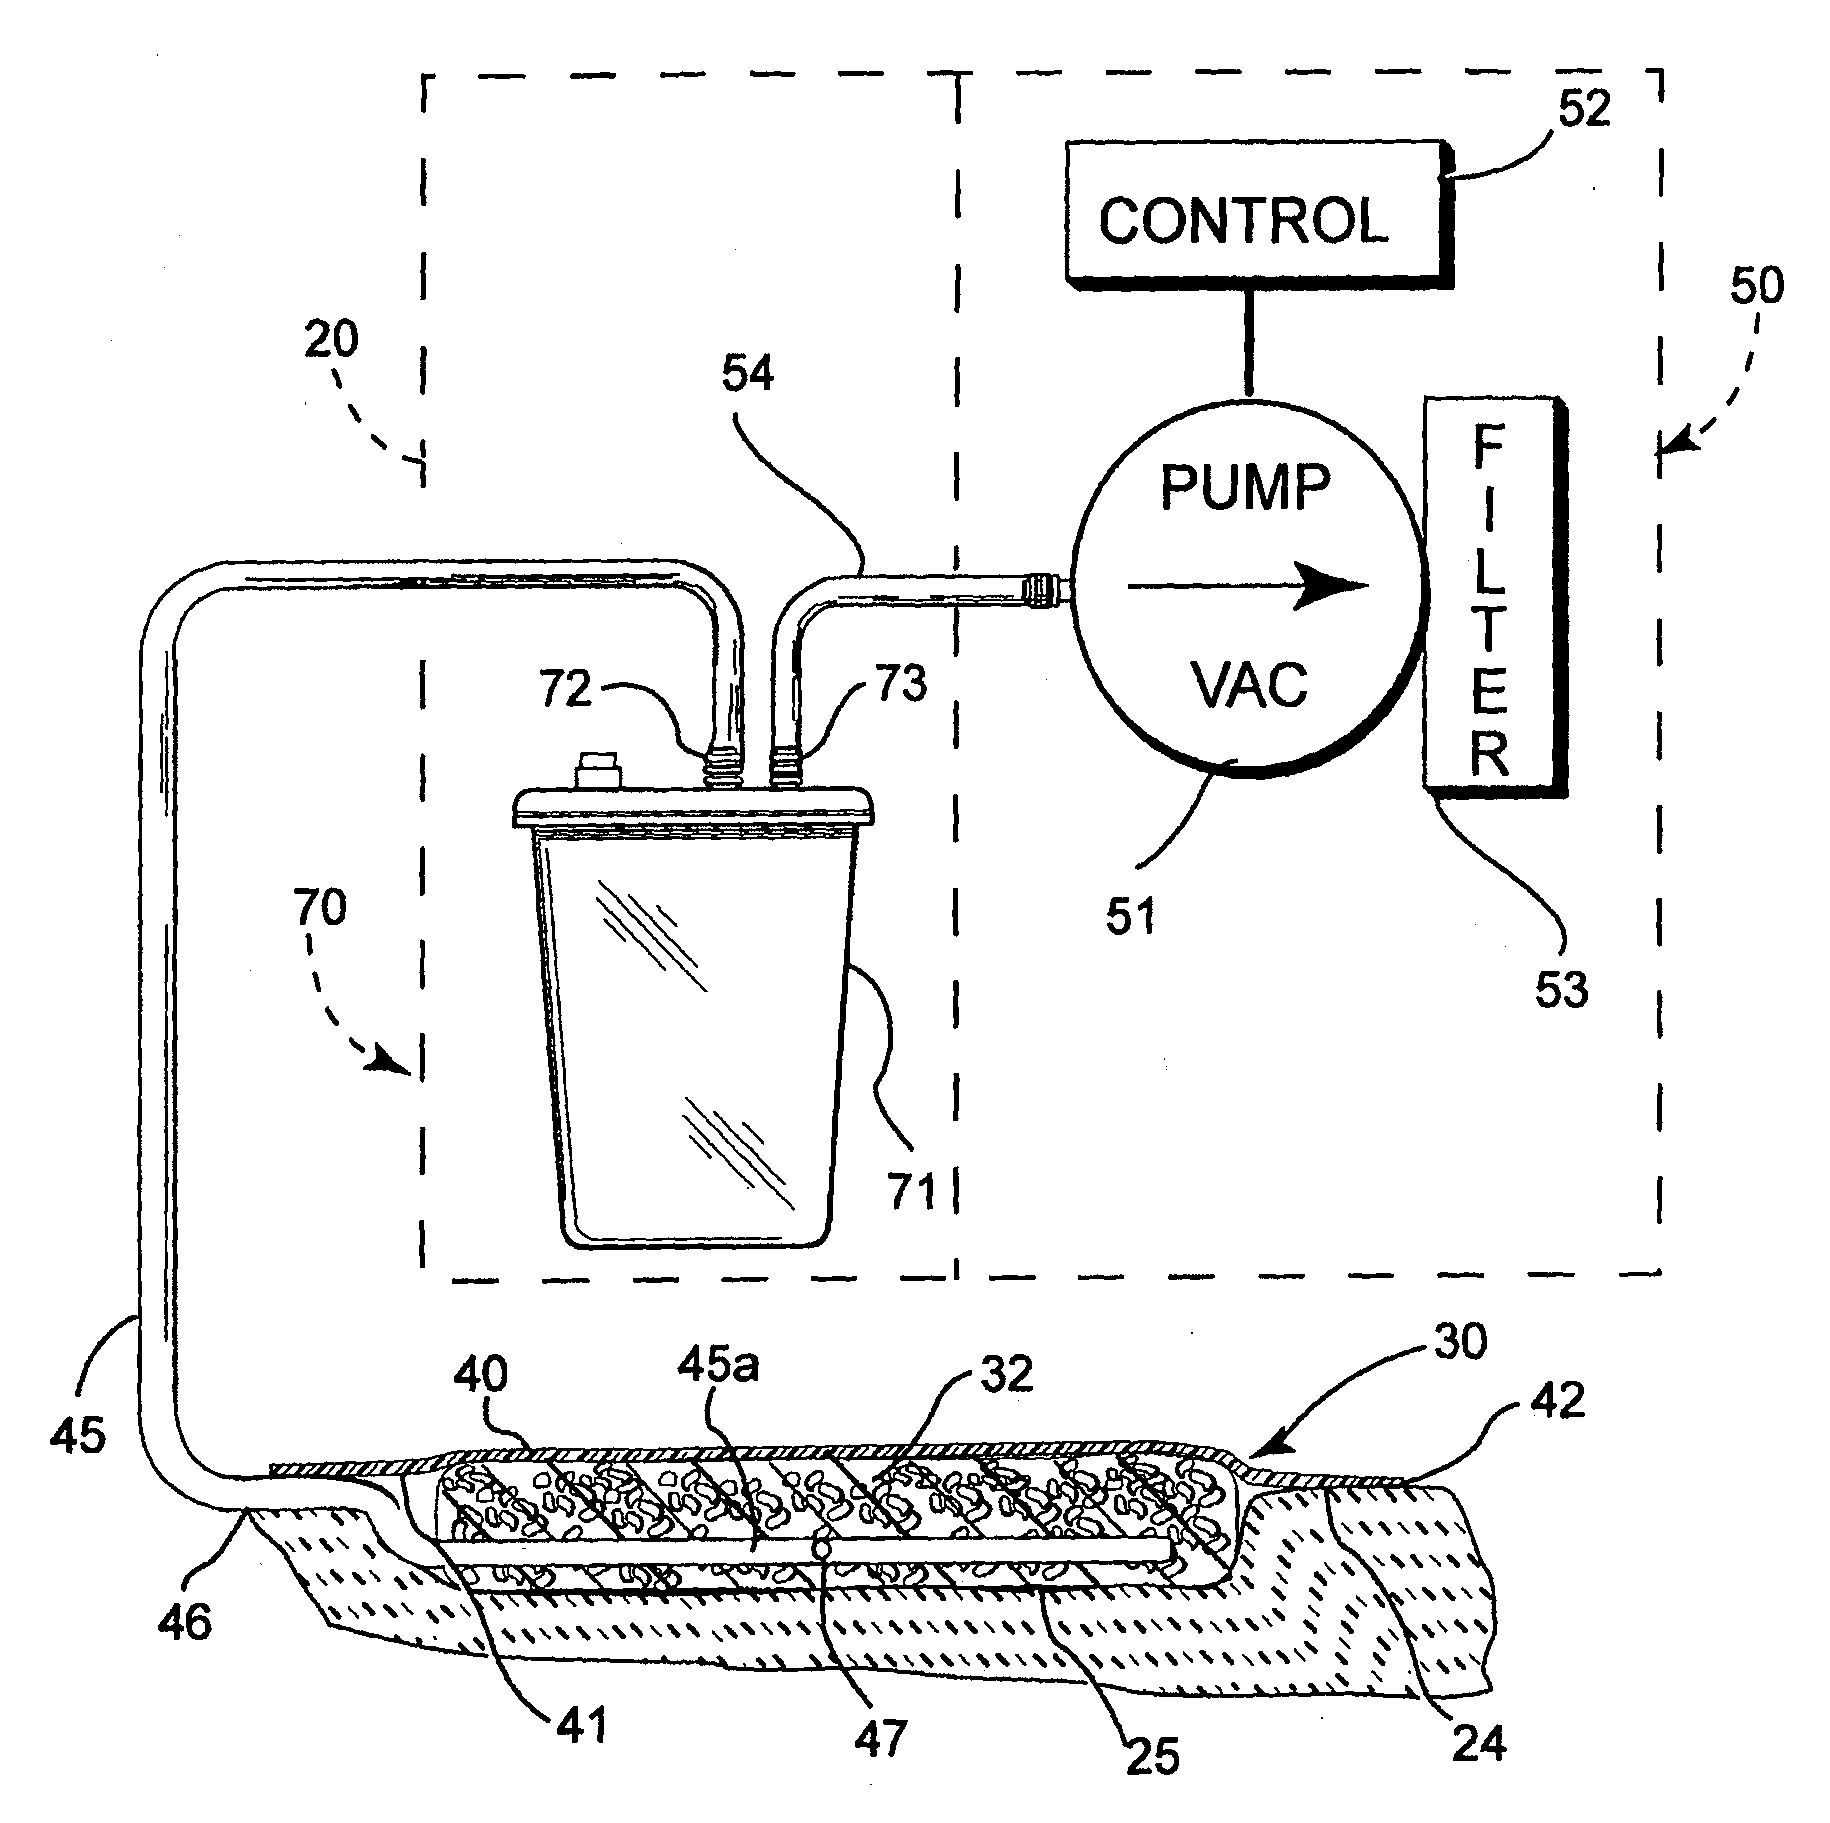 Reduced pressure treatment system